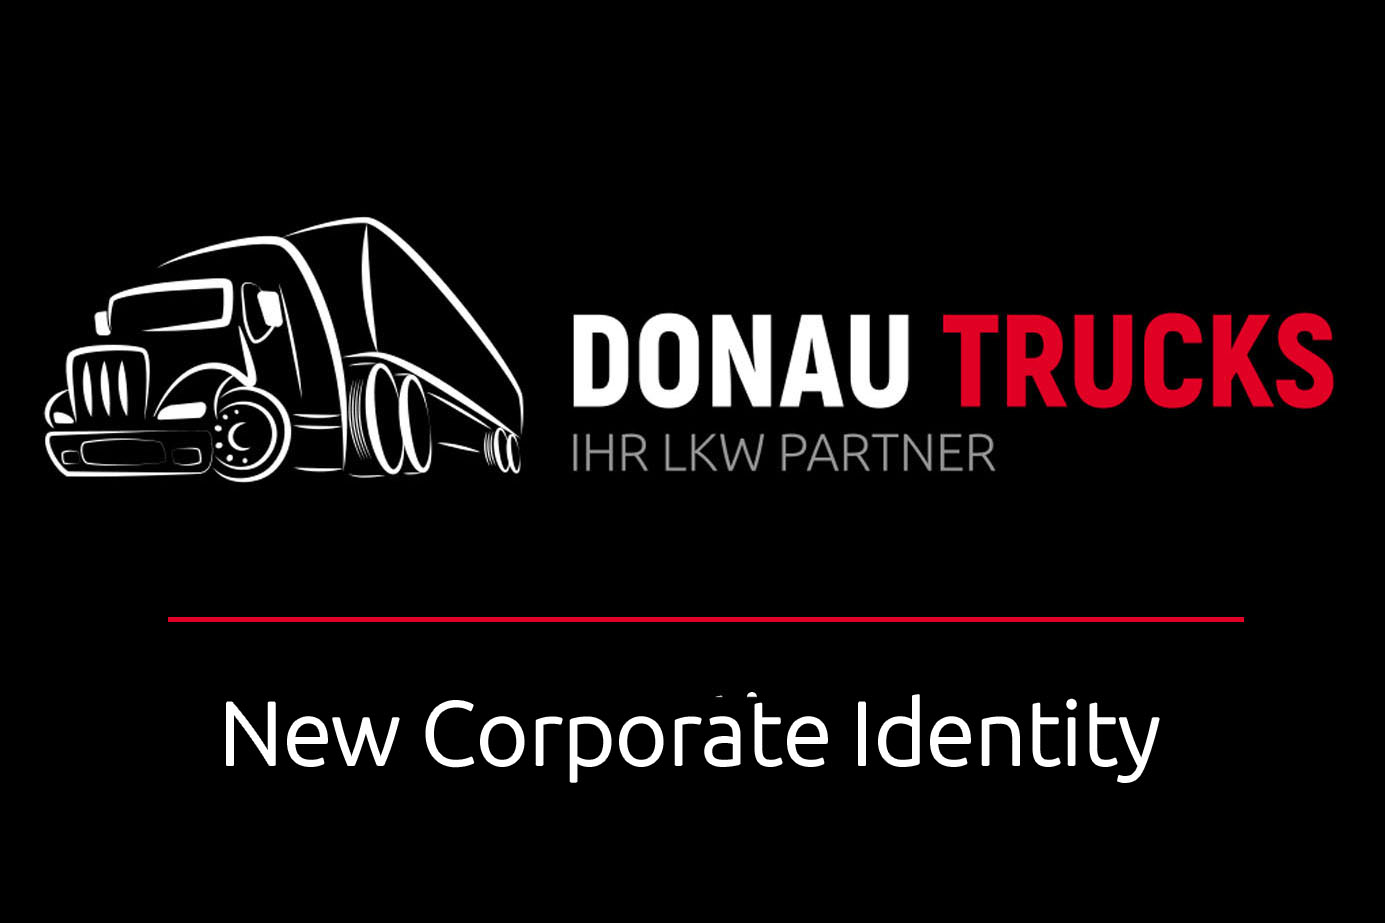 DONAU TRUCK - Your Truck partner has a new corporate identity and a multifunctional website - 1